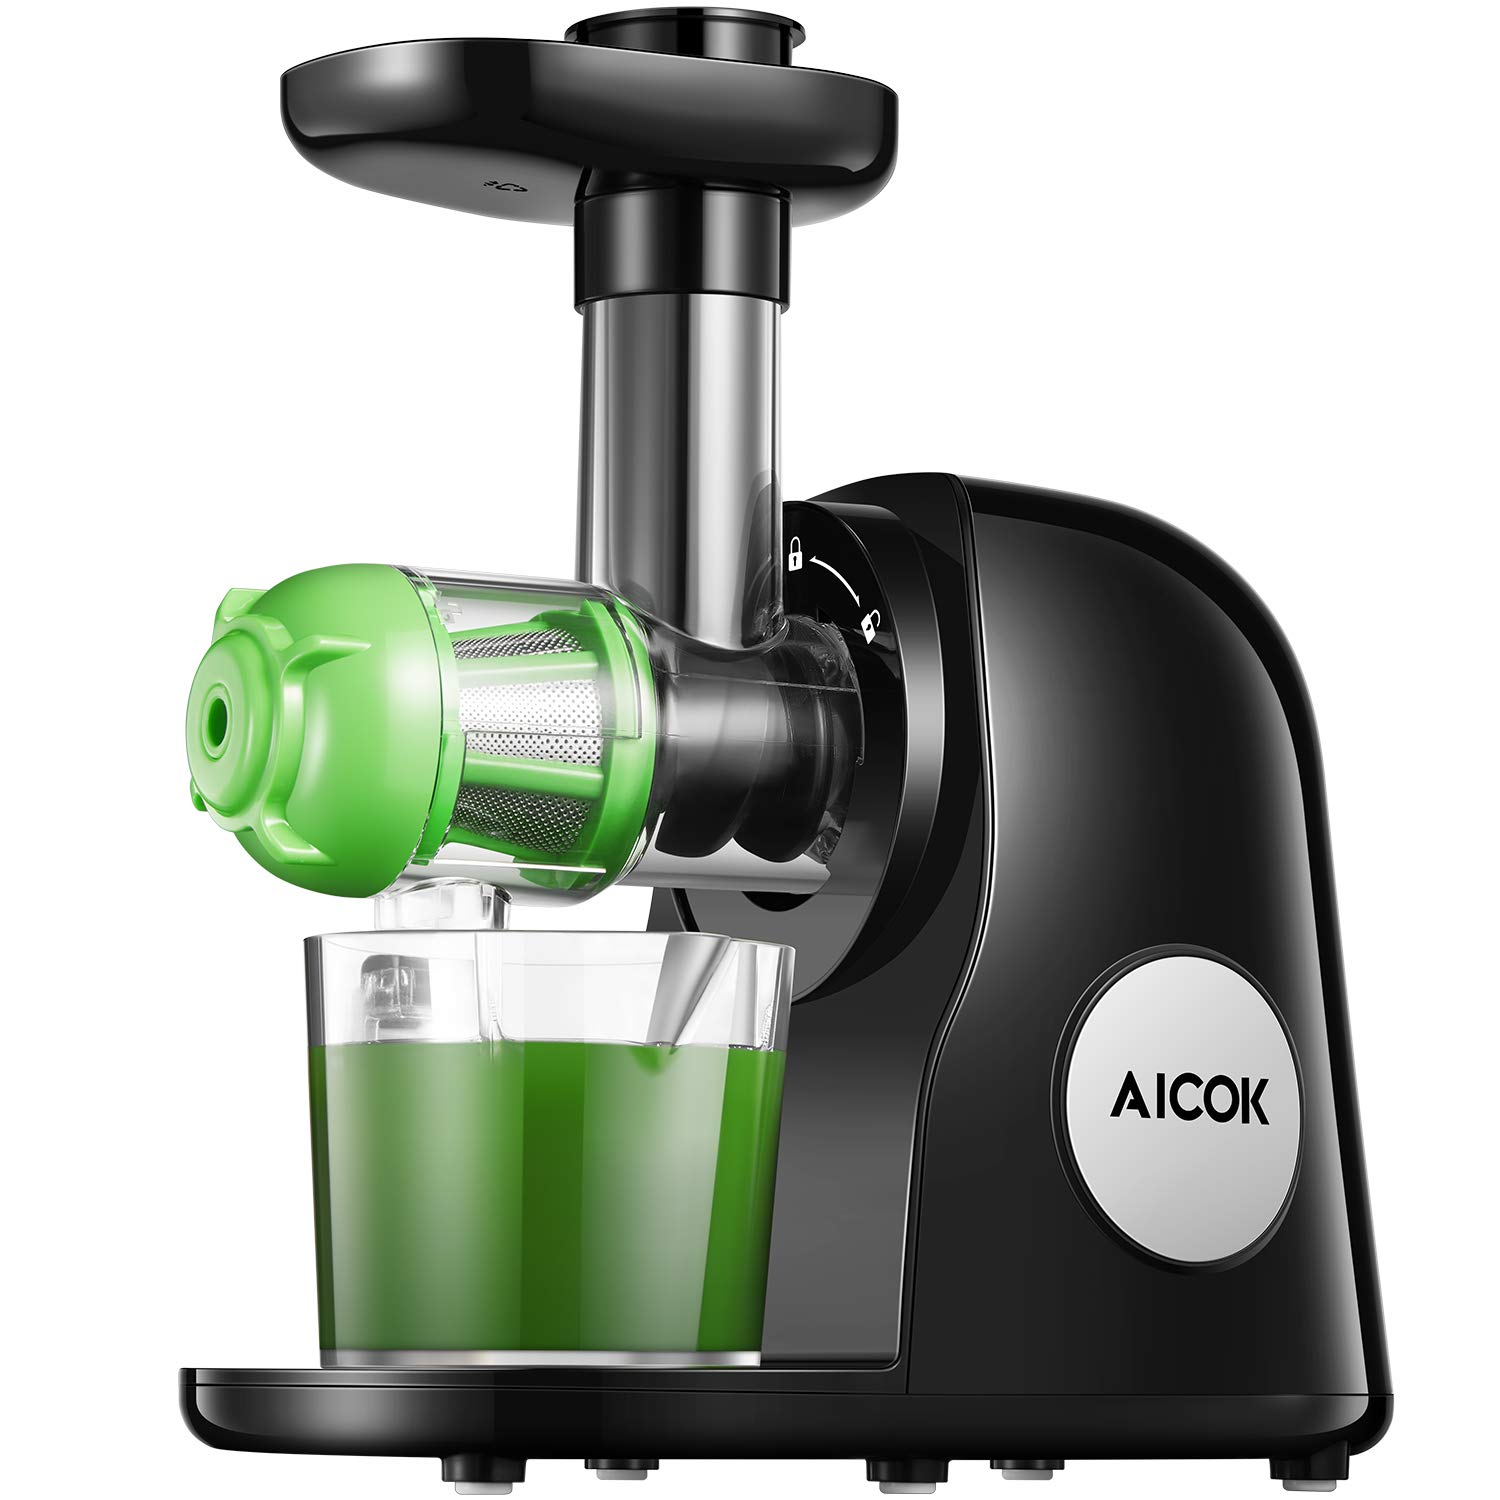 Aicok’s slow masticating juicer extractor